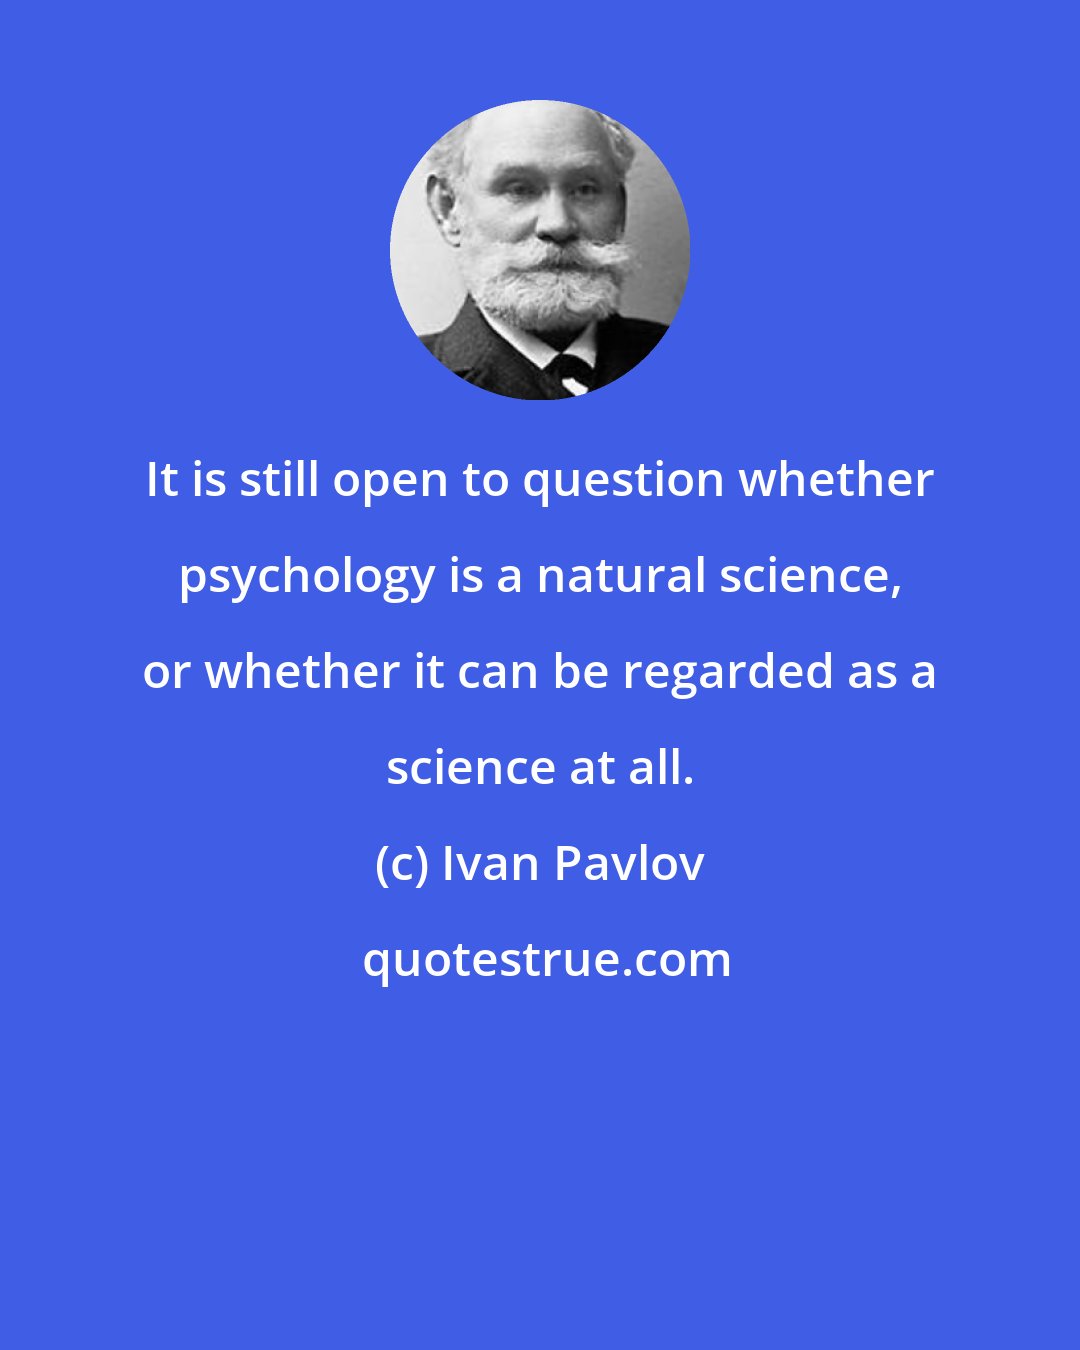 Ivan Pavlov: It is still open to question whether psychology is a natural science, or whether it can be regarded as a science at all.